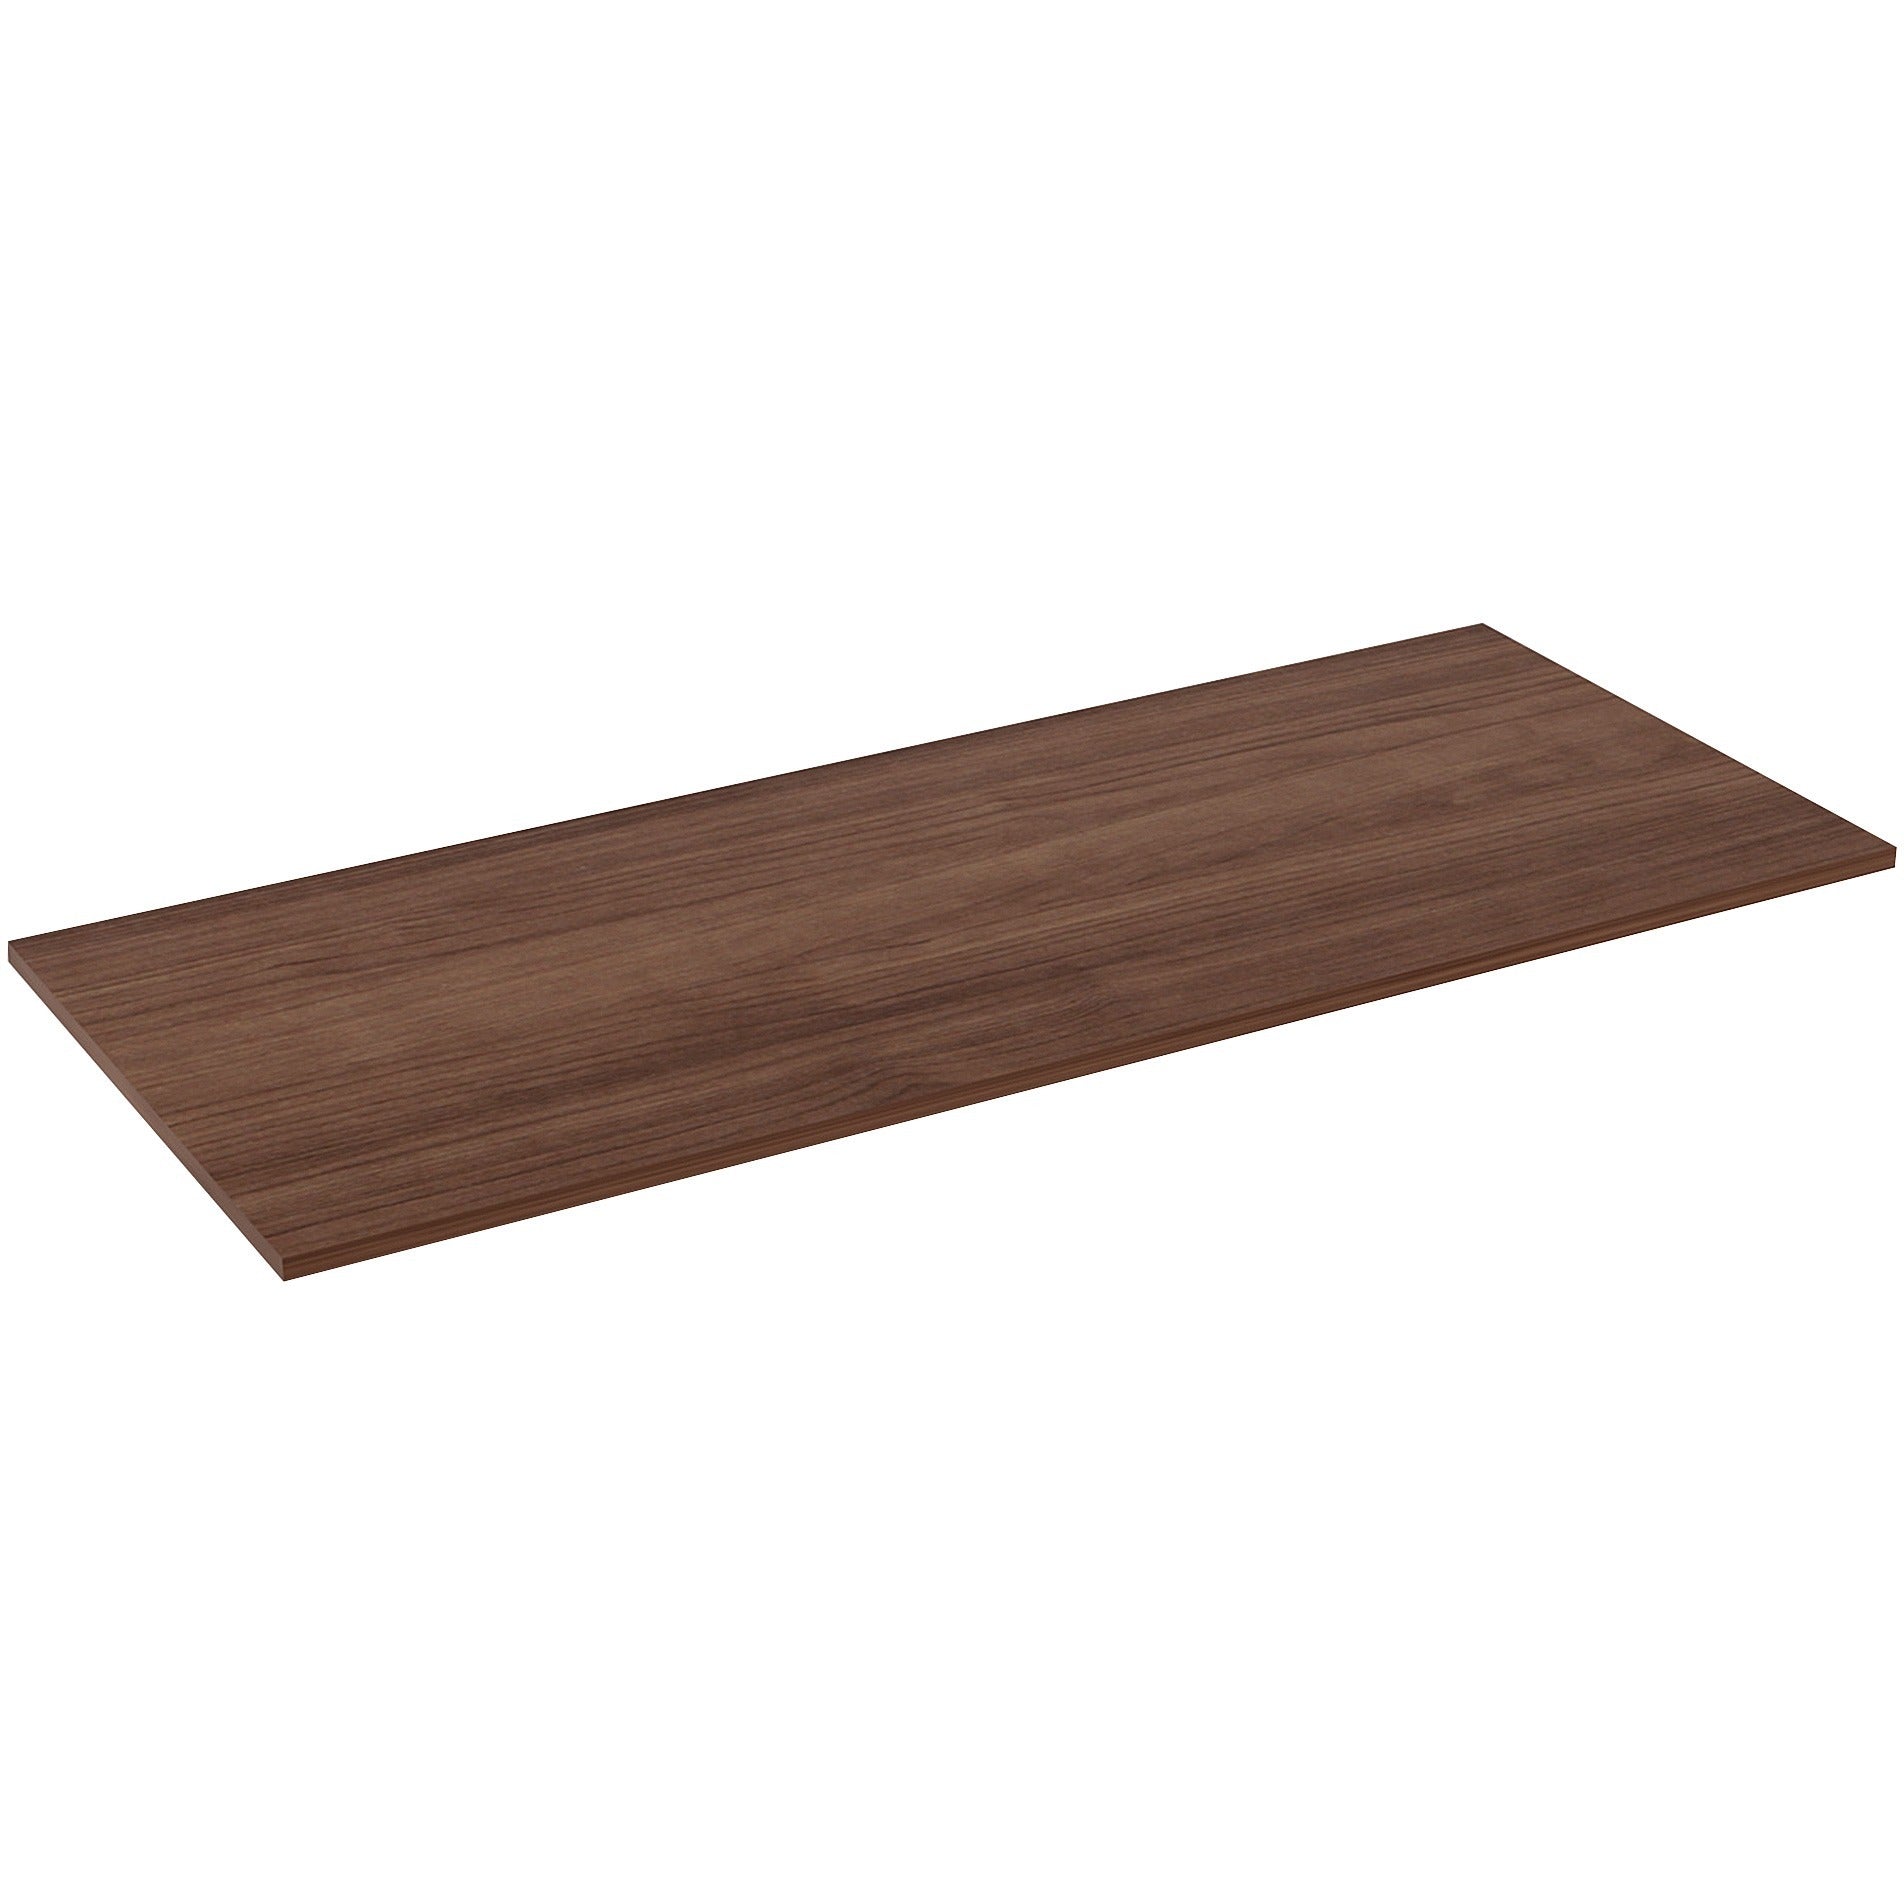 lorell-relevance-series-tabletop-for-table-topwalnut-rectangle-laminated-top-adjustable-height-x-72-table-top-width-x-30-table-top-depth-x-1-table-top-thickness-assembly-required-1-each_llr34407 - 3